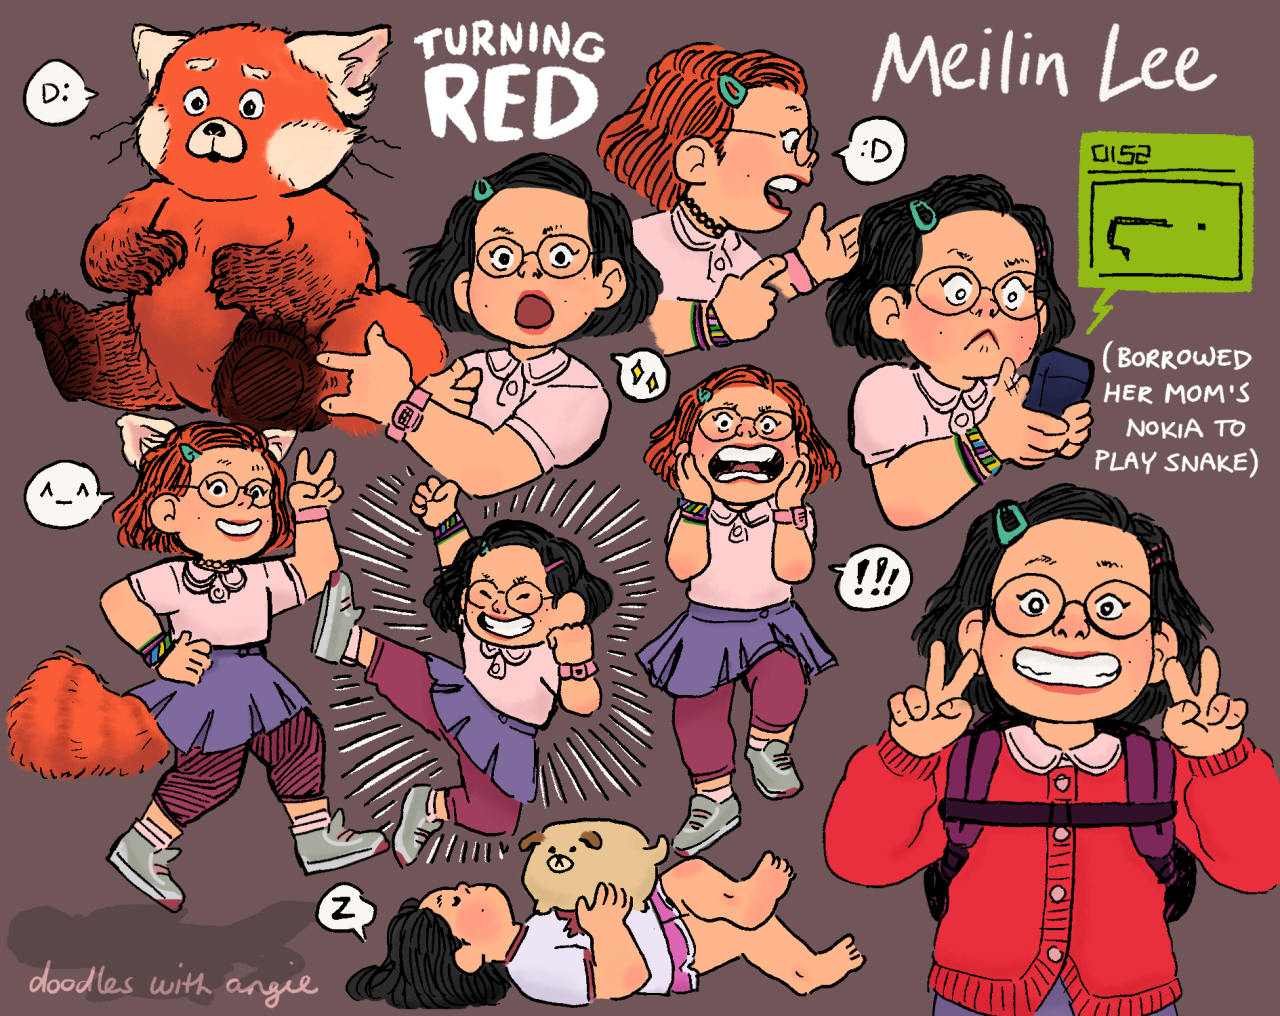 doodles with angie — “I'm Meilin Lee! And ever since I turned 13, I've...